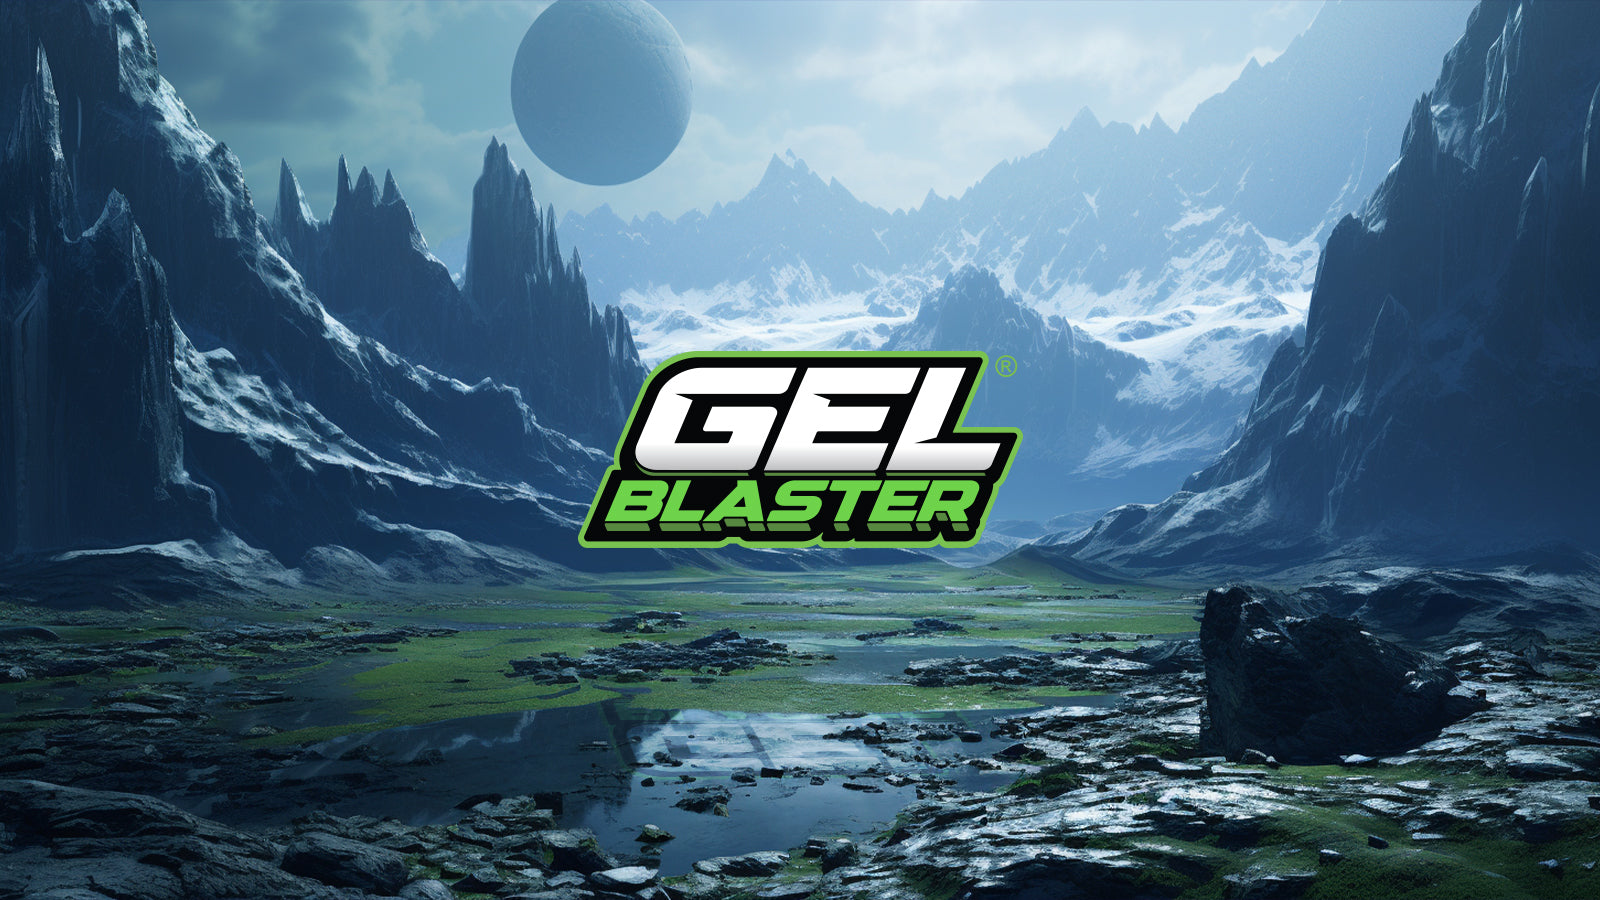 Gel Blaster x The Halo Universe Coming Soon